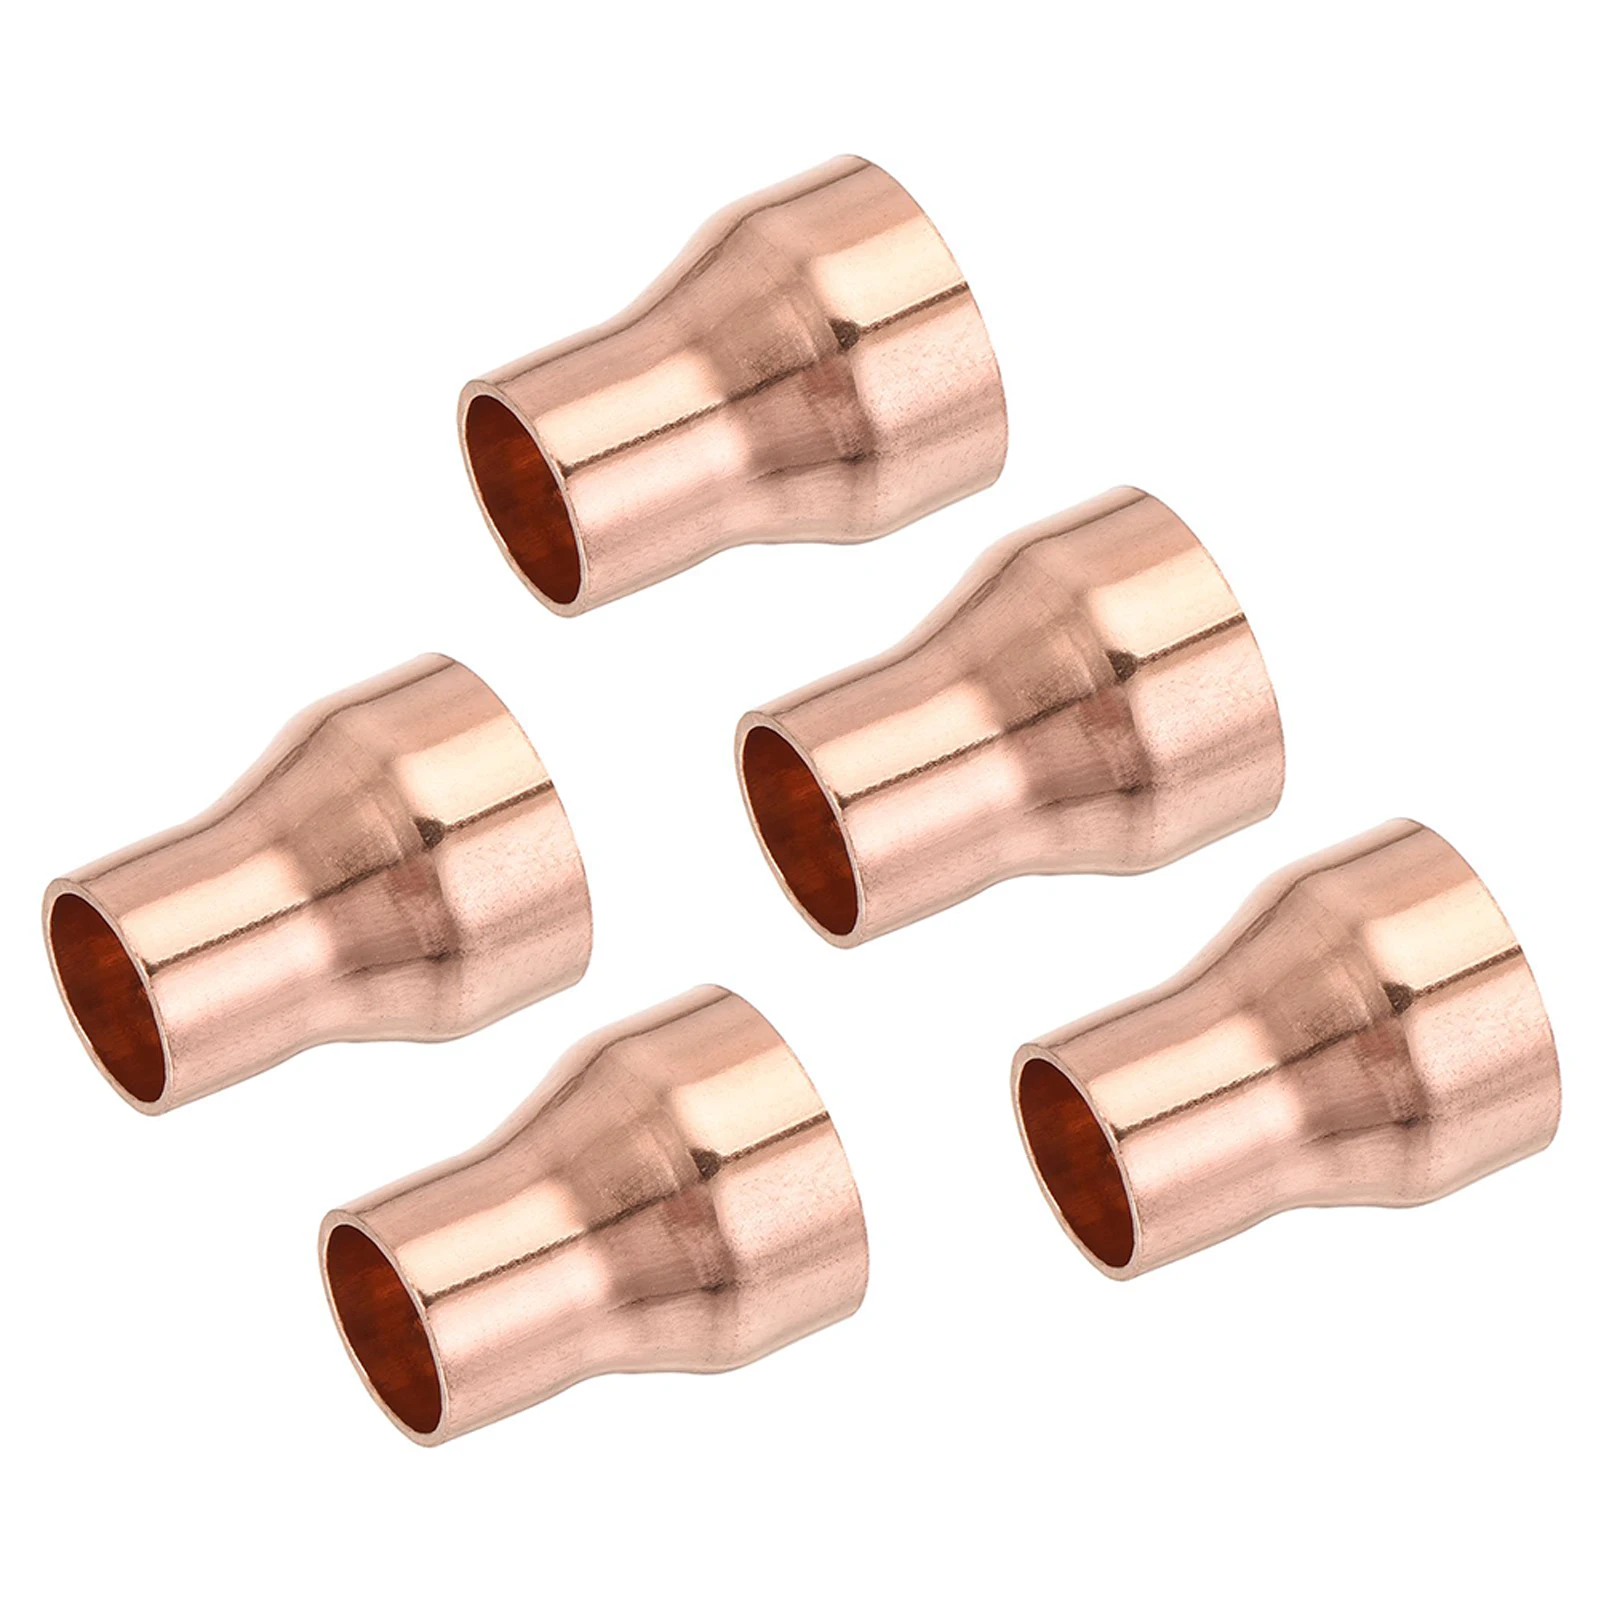 

5pcs With Sweat End Red Copper Water Heater Professional Reducer Coupling Pipe Fitting Refrigeration Adapter Multifunctional